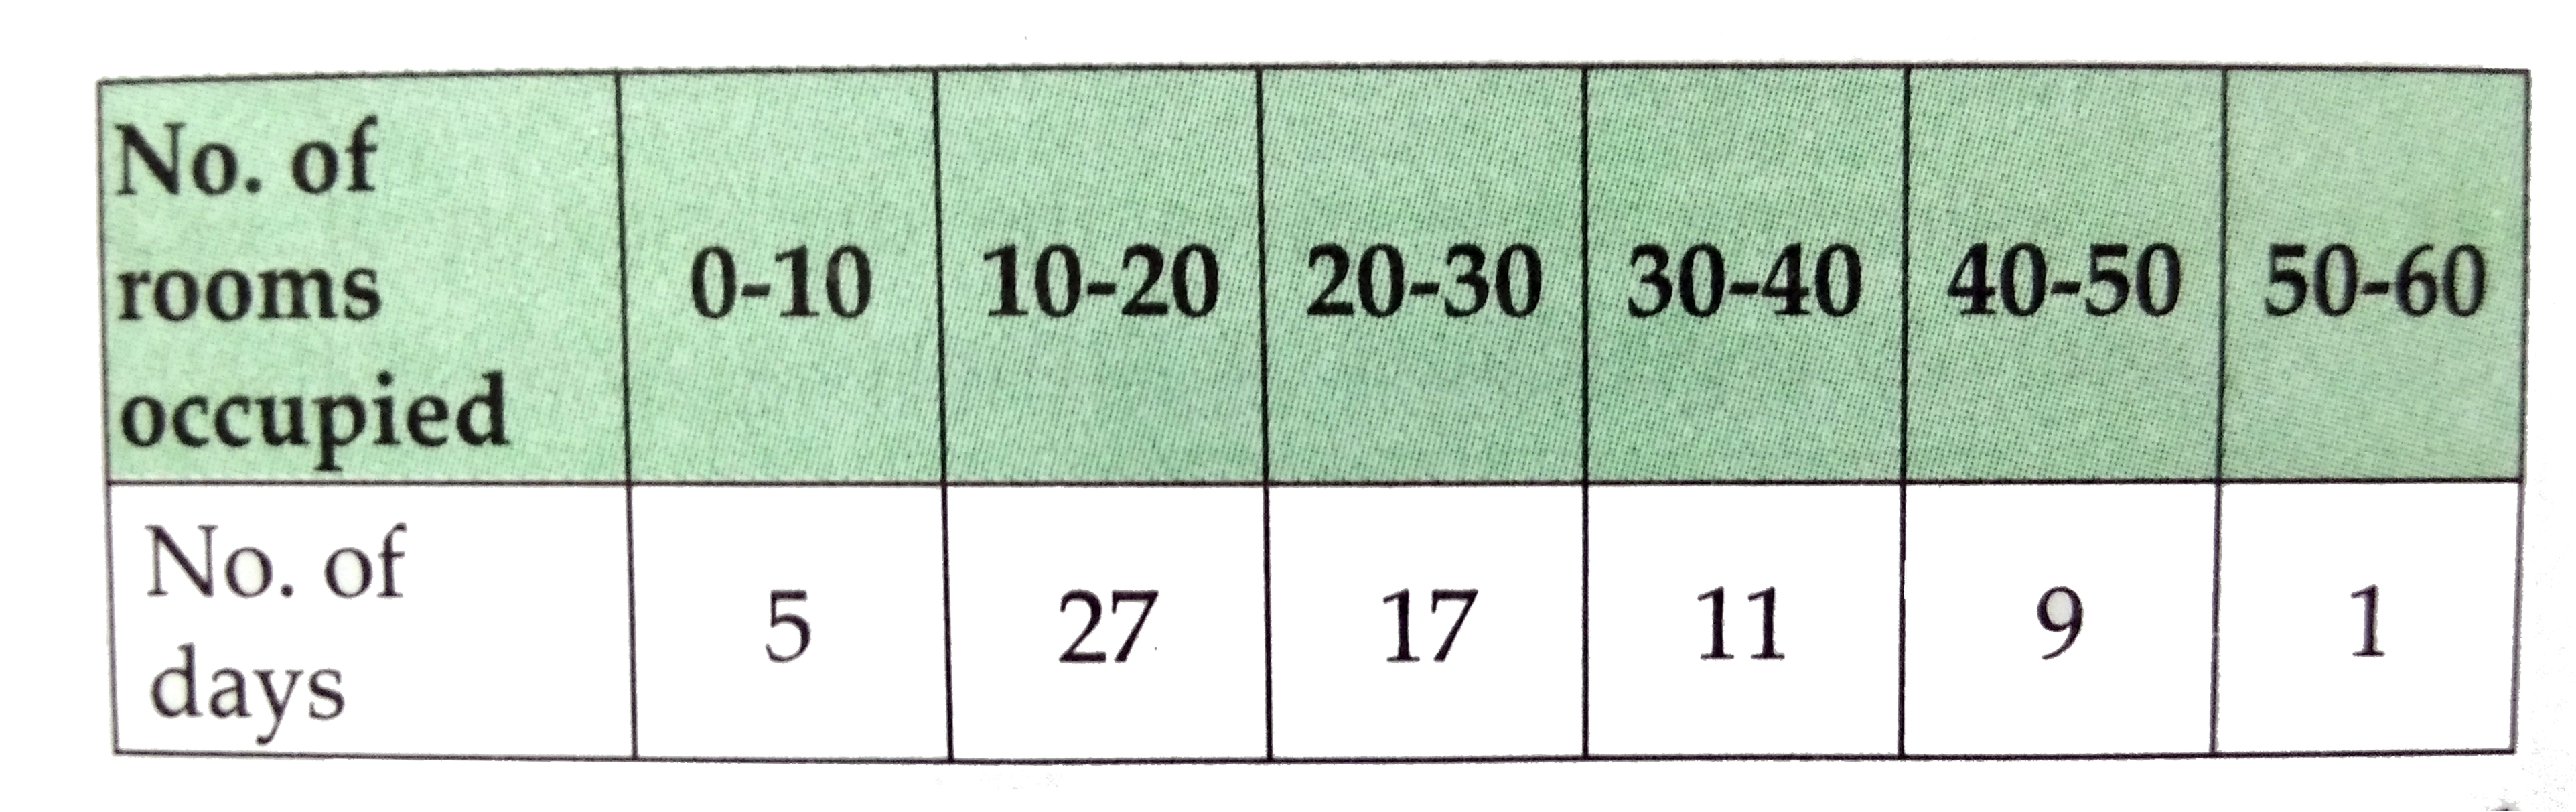 Following table shows frequency distribution of no. of rooms occupied in a hotal  per day  .        Find the median no. of rooms occupied  in a hotal  per day .